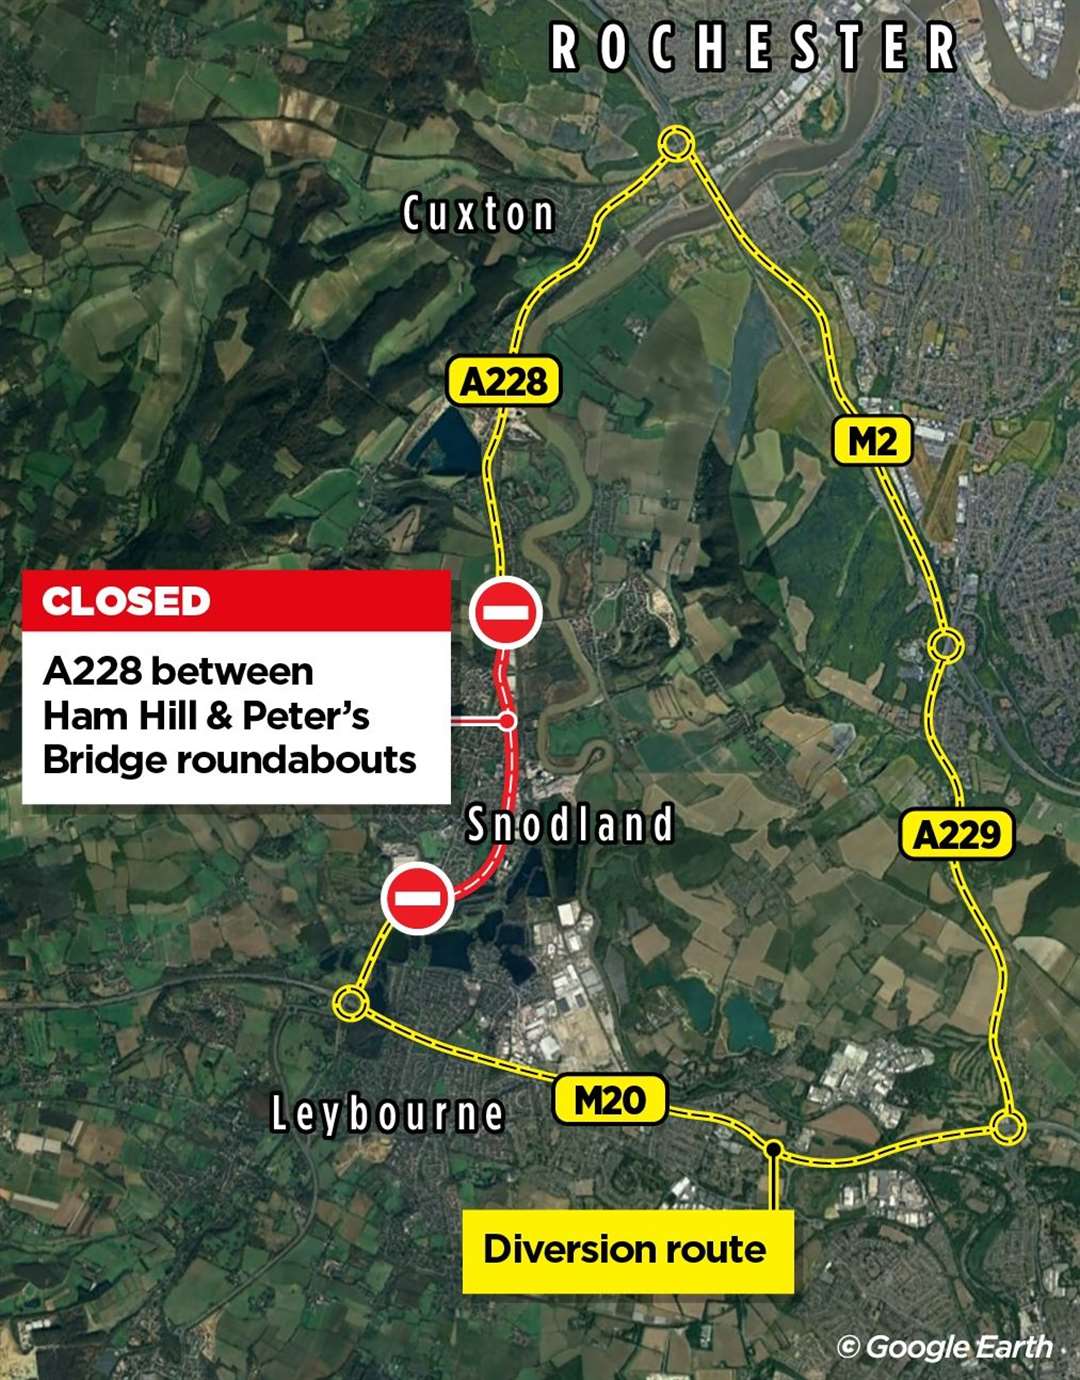 A diversion route has been put in place for motorists